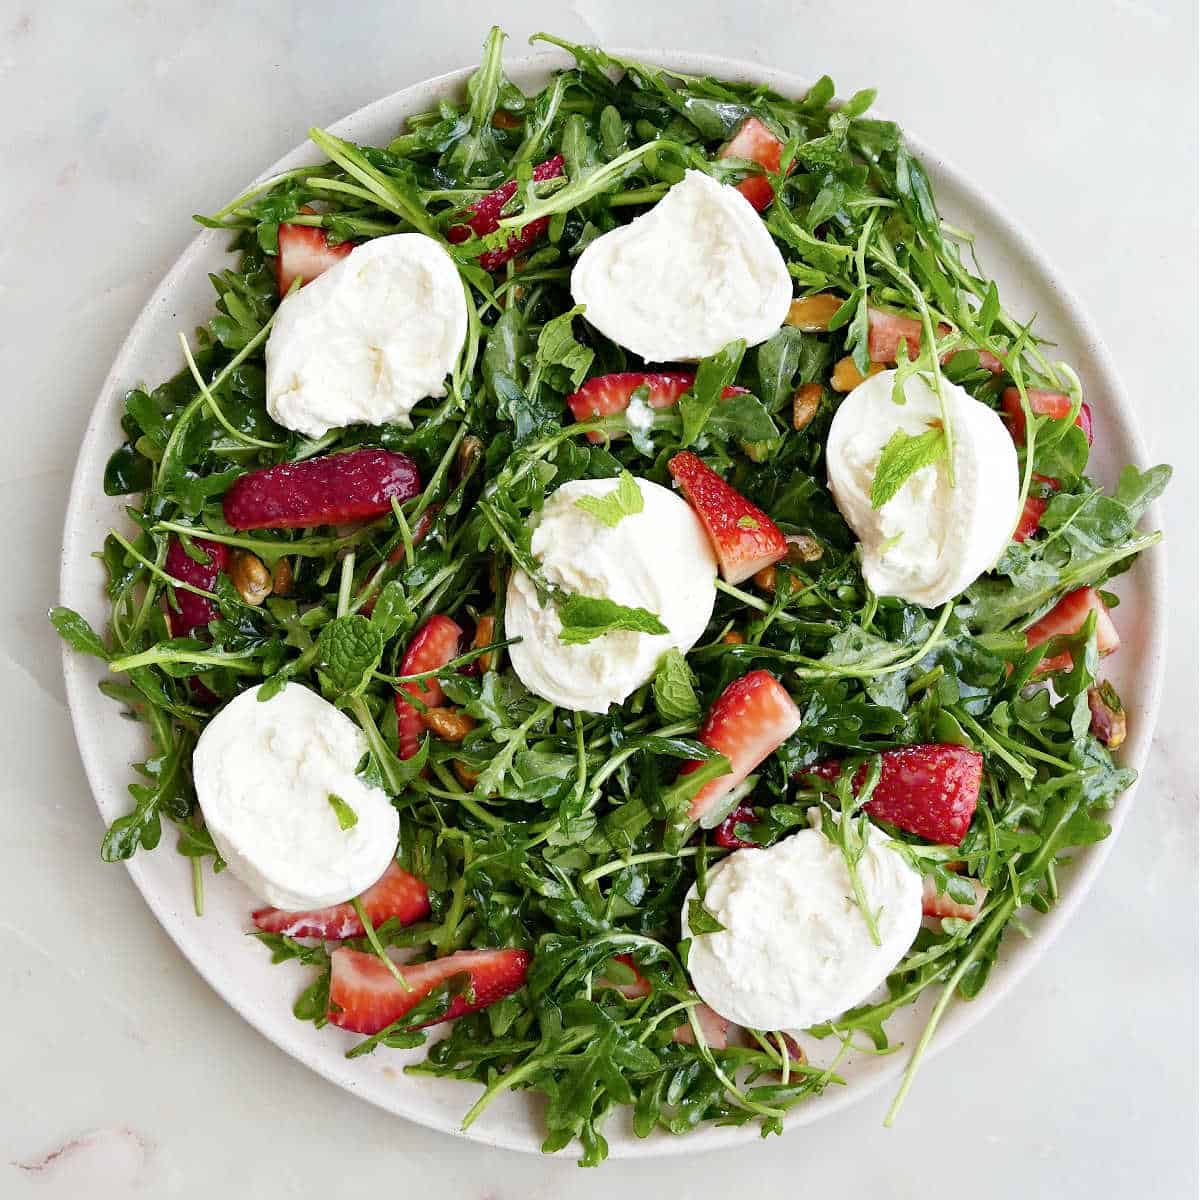 arugula salad with burrata, berries, and pistachios on a serving plate